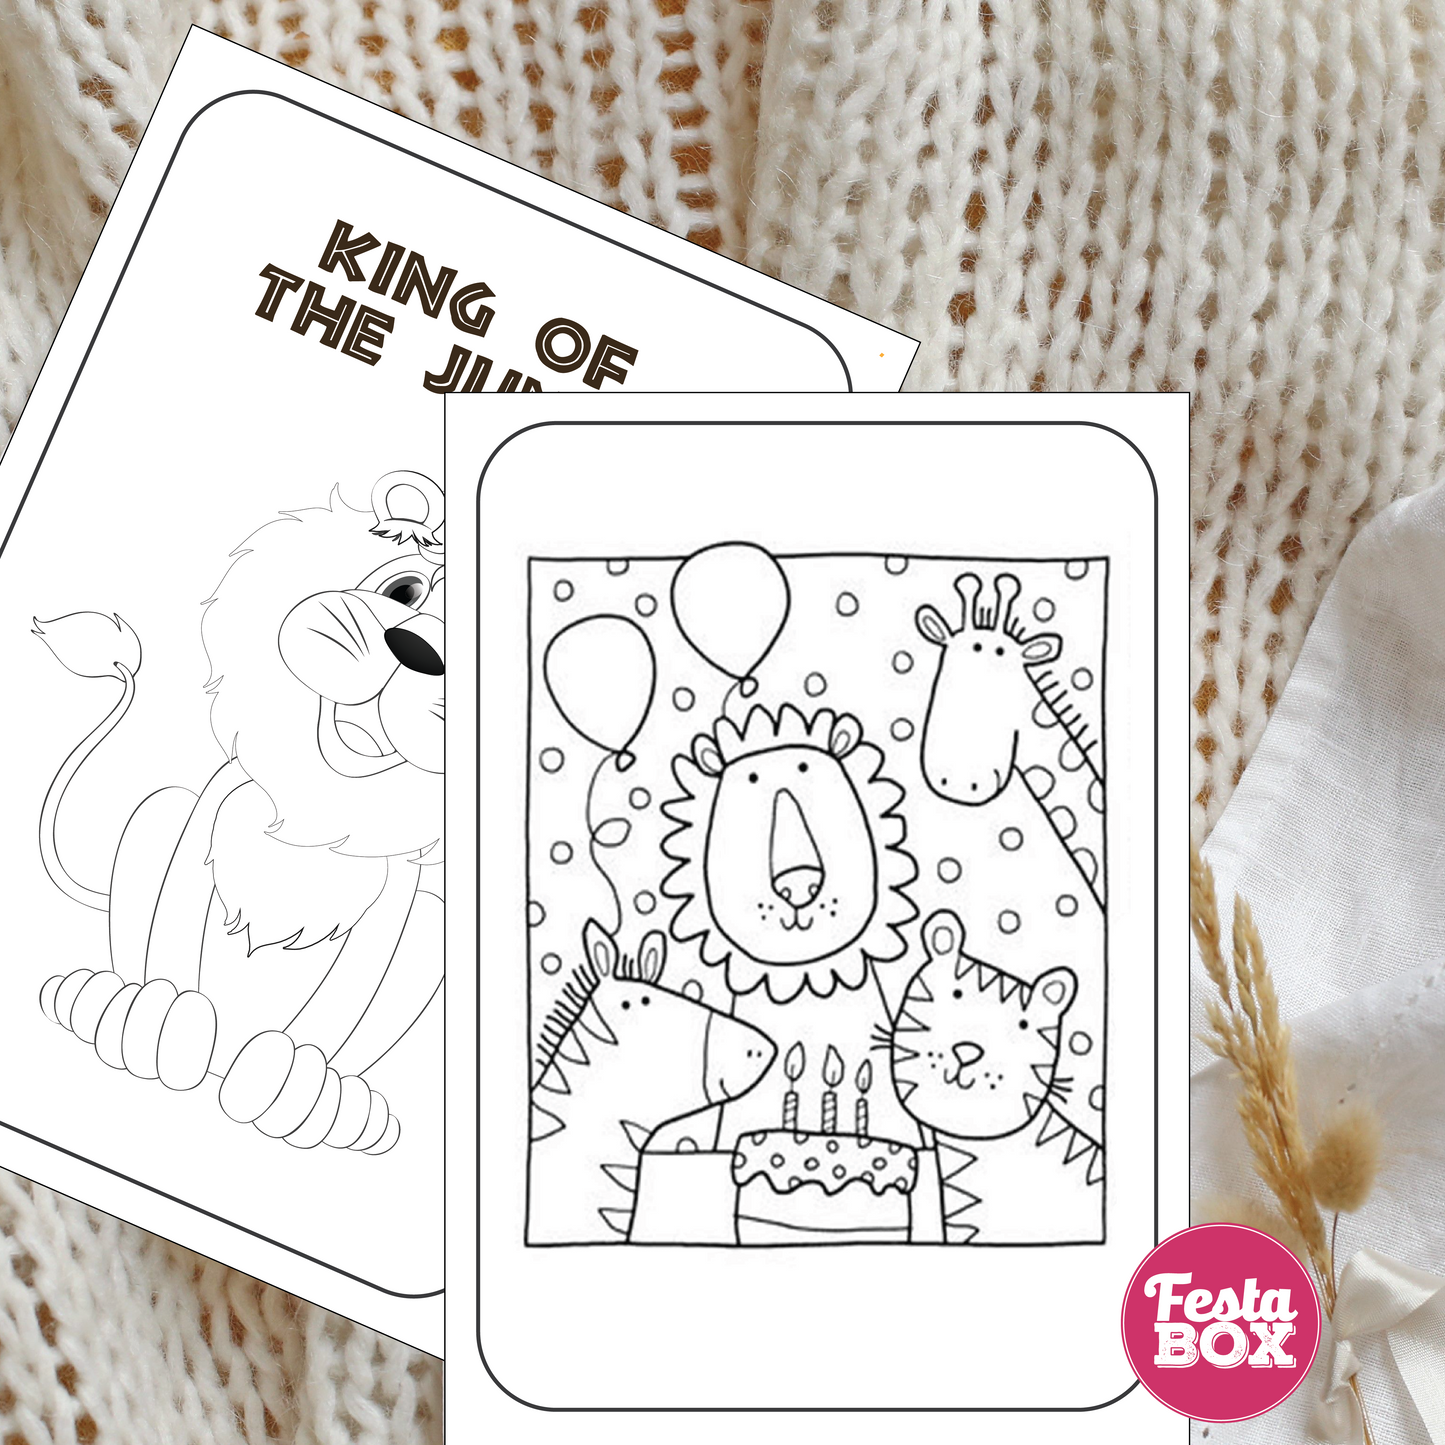 These colouring sheets are a part of the Jungle Safari Birthday Party Theme Collection by Festabox